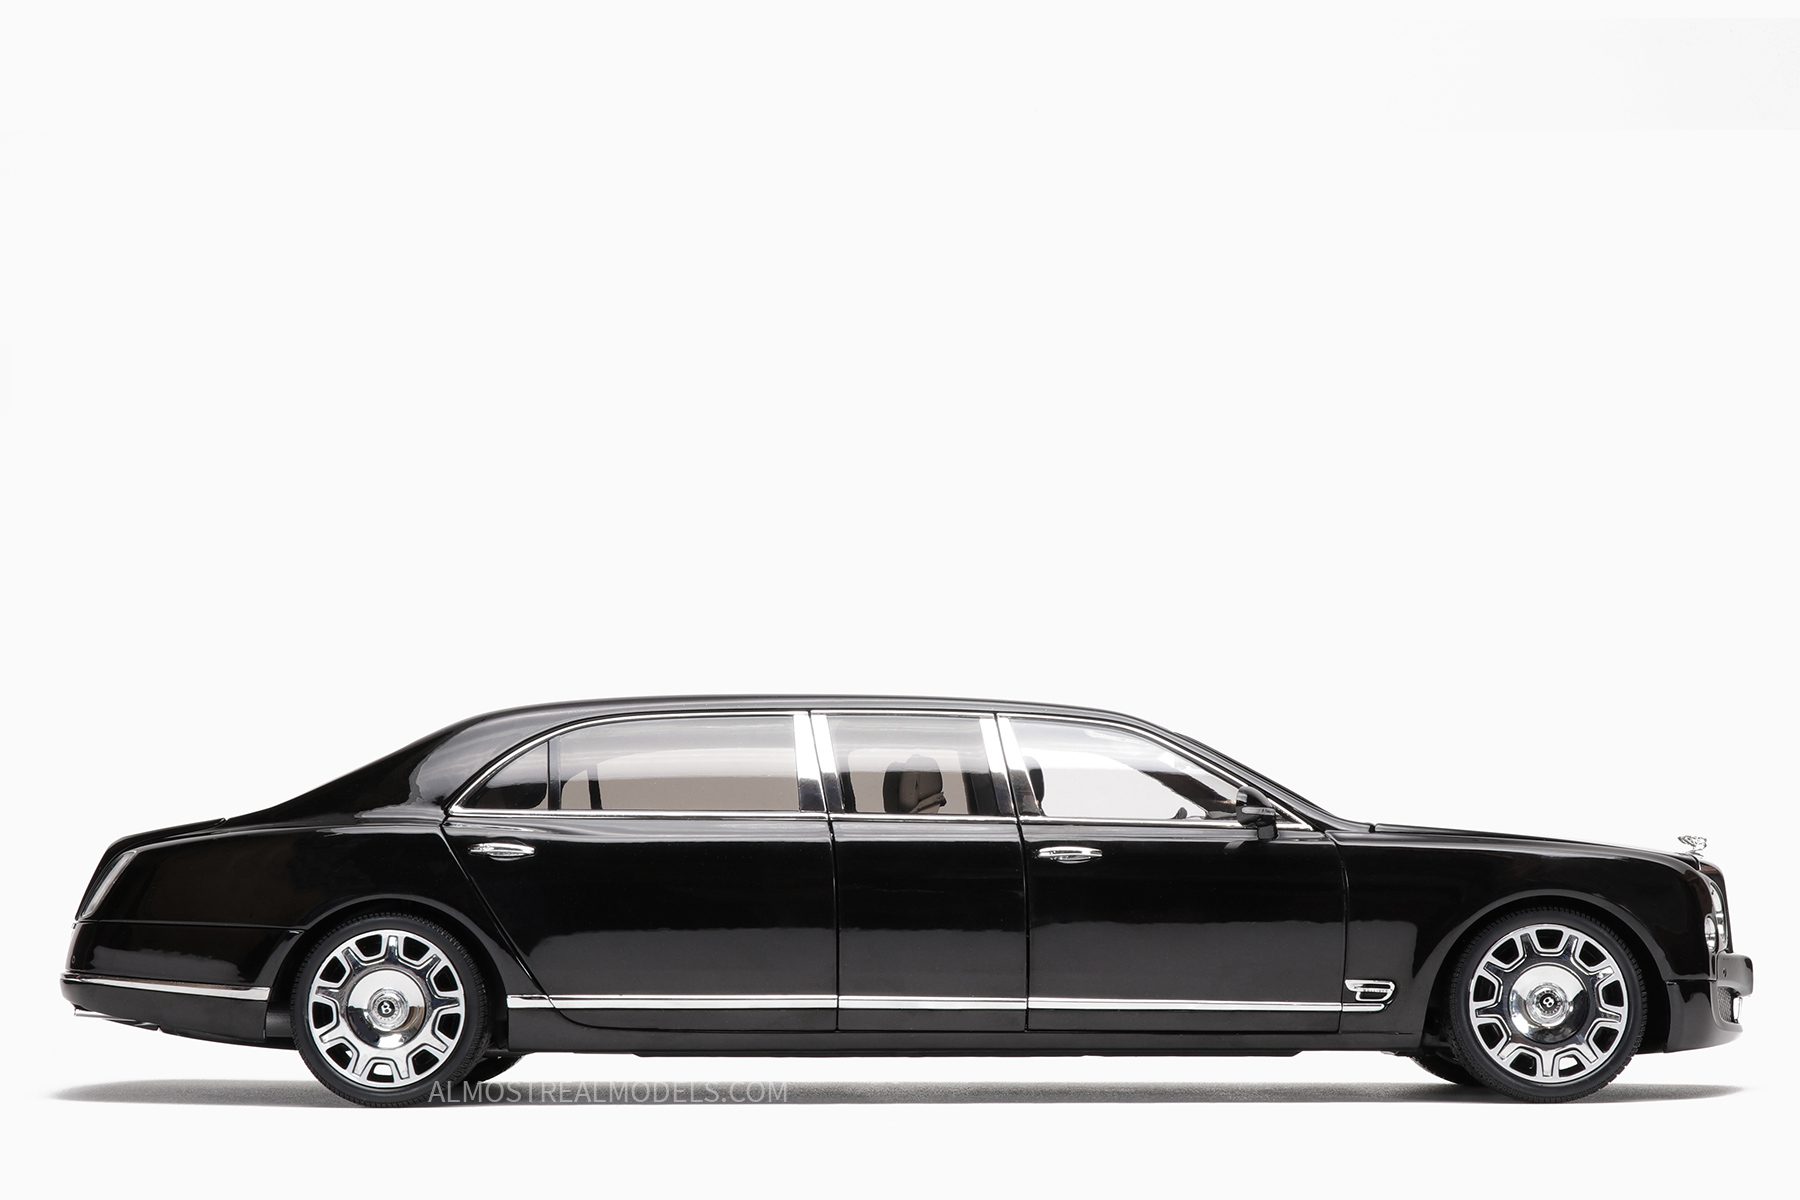 Bentley Mulsanne Grand Limousine by Mulliner black by Almost Real 1:18